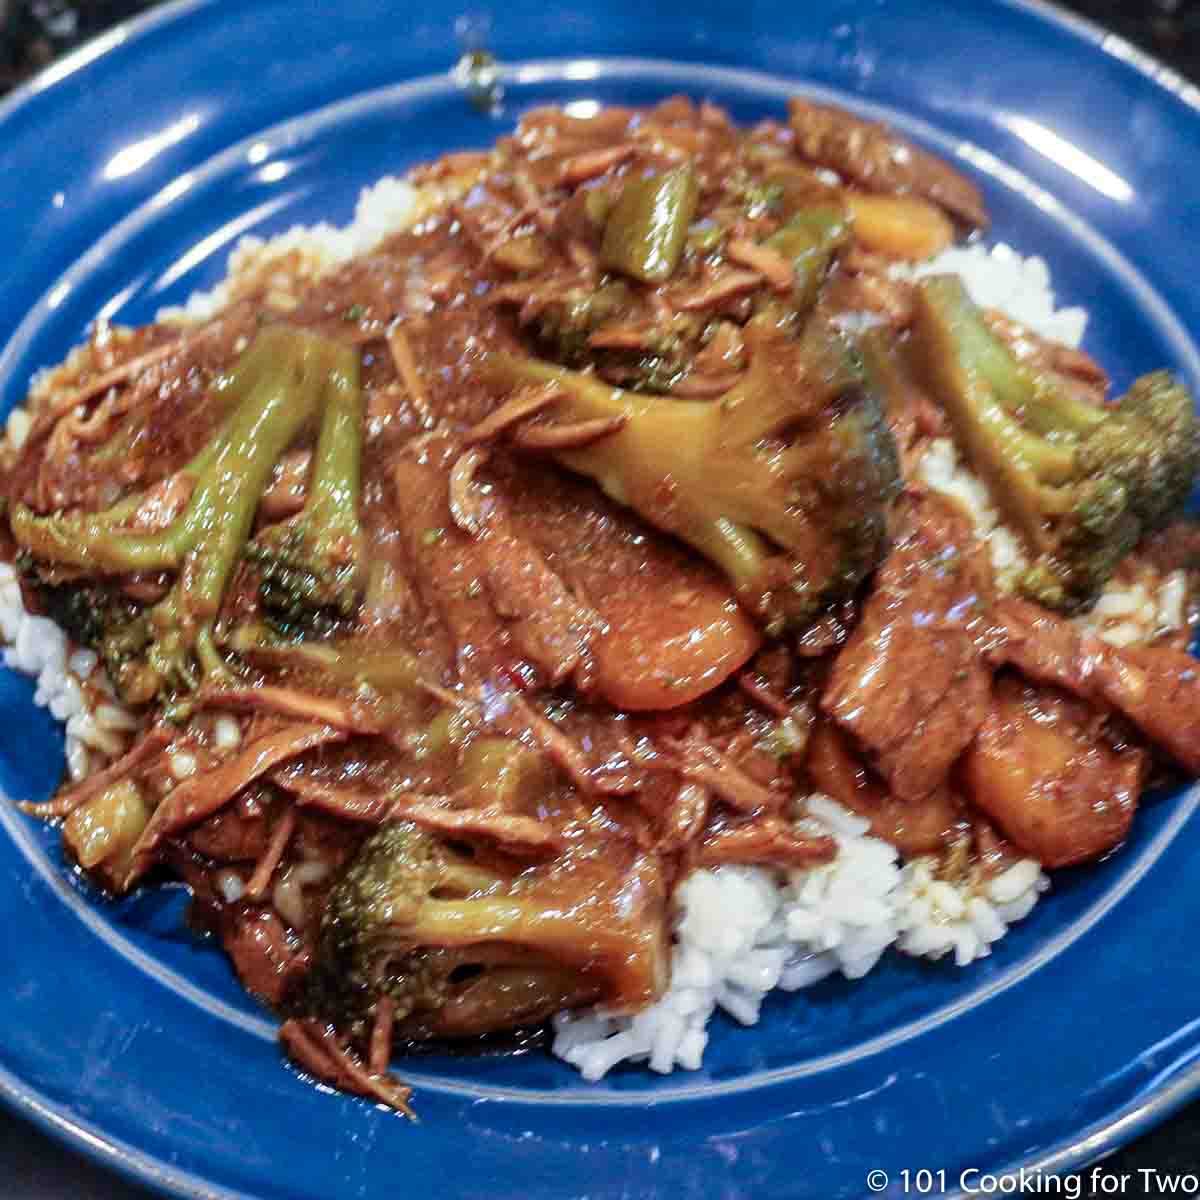 beef and broccoli with rice on blue plate.